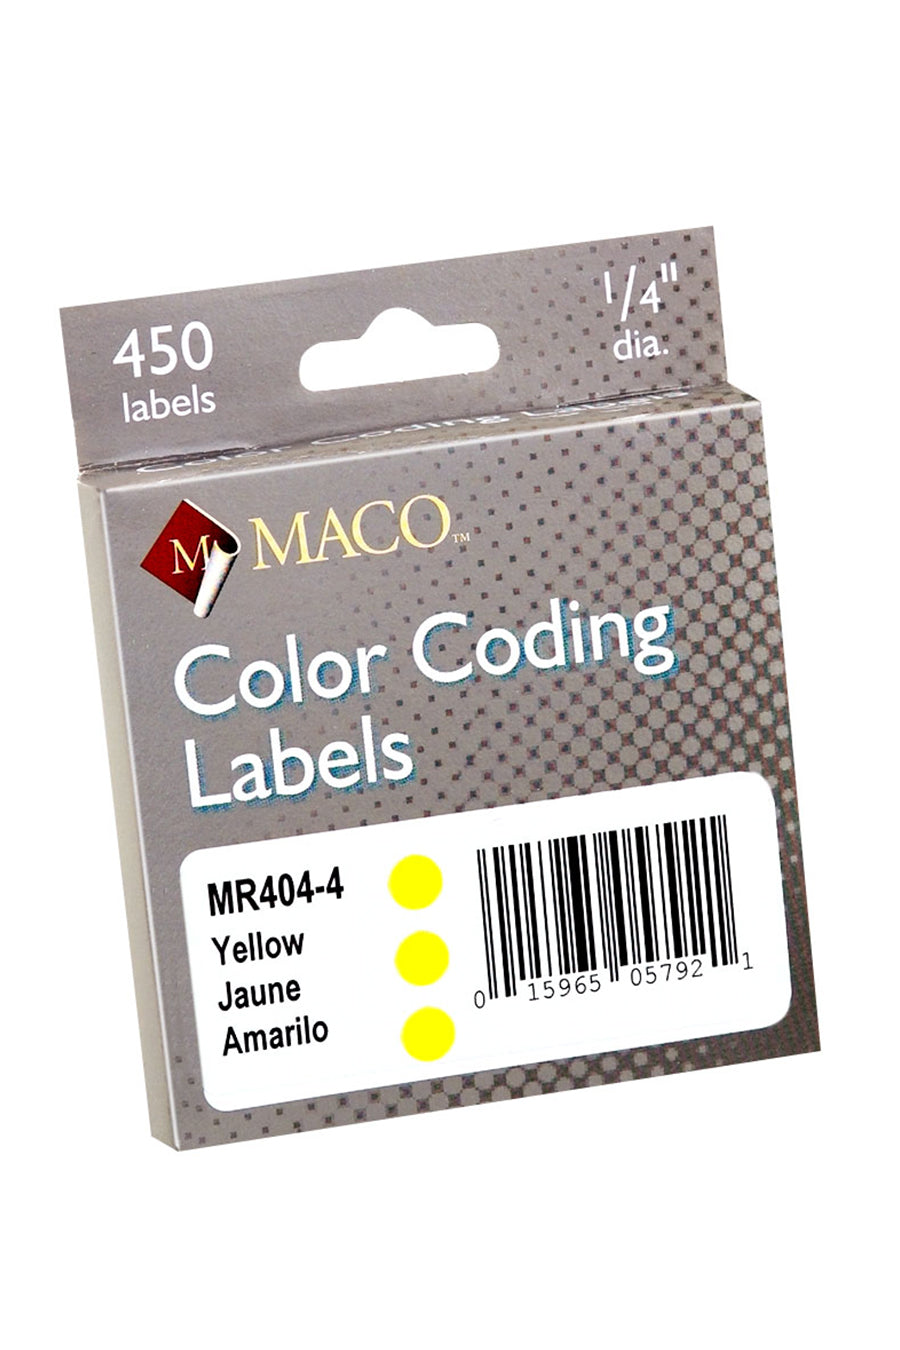 1/4" Dia. Color Coding Labels, Yellow, 450/On Roll in Dispenser Box